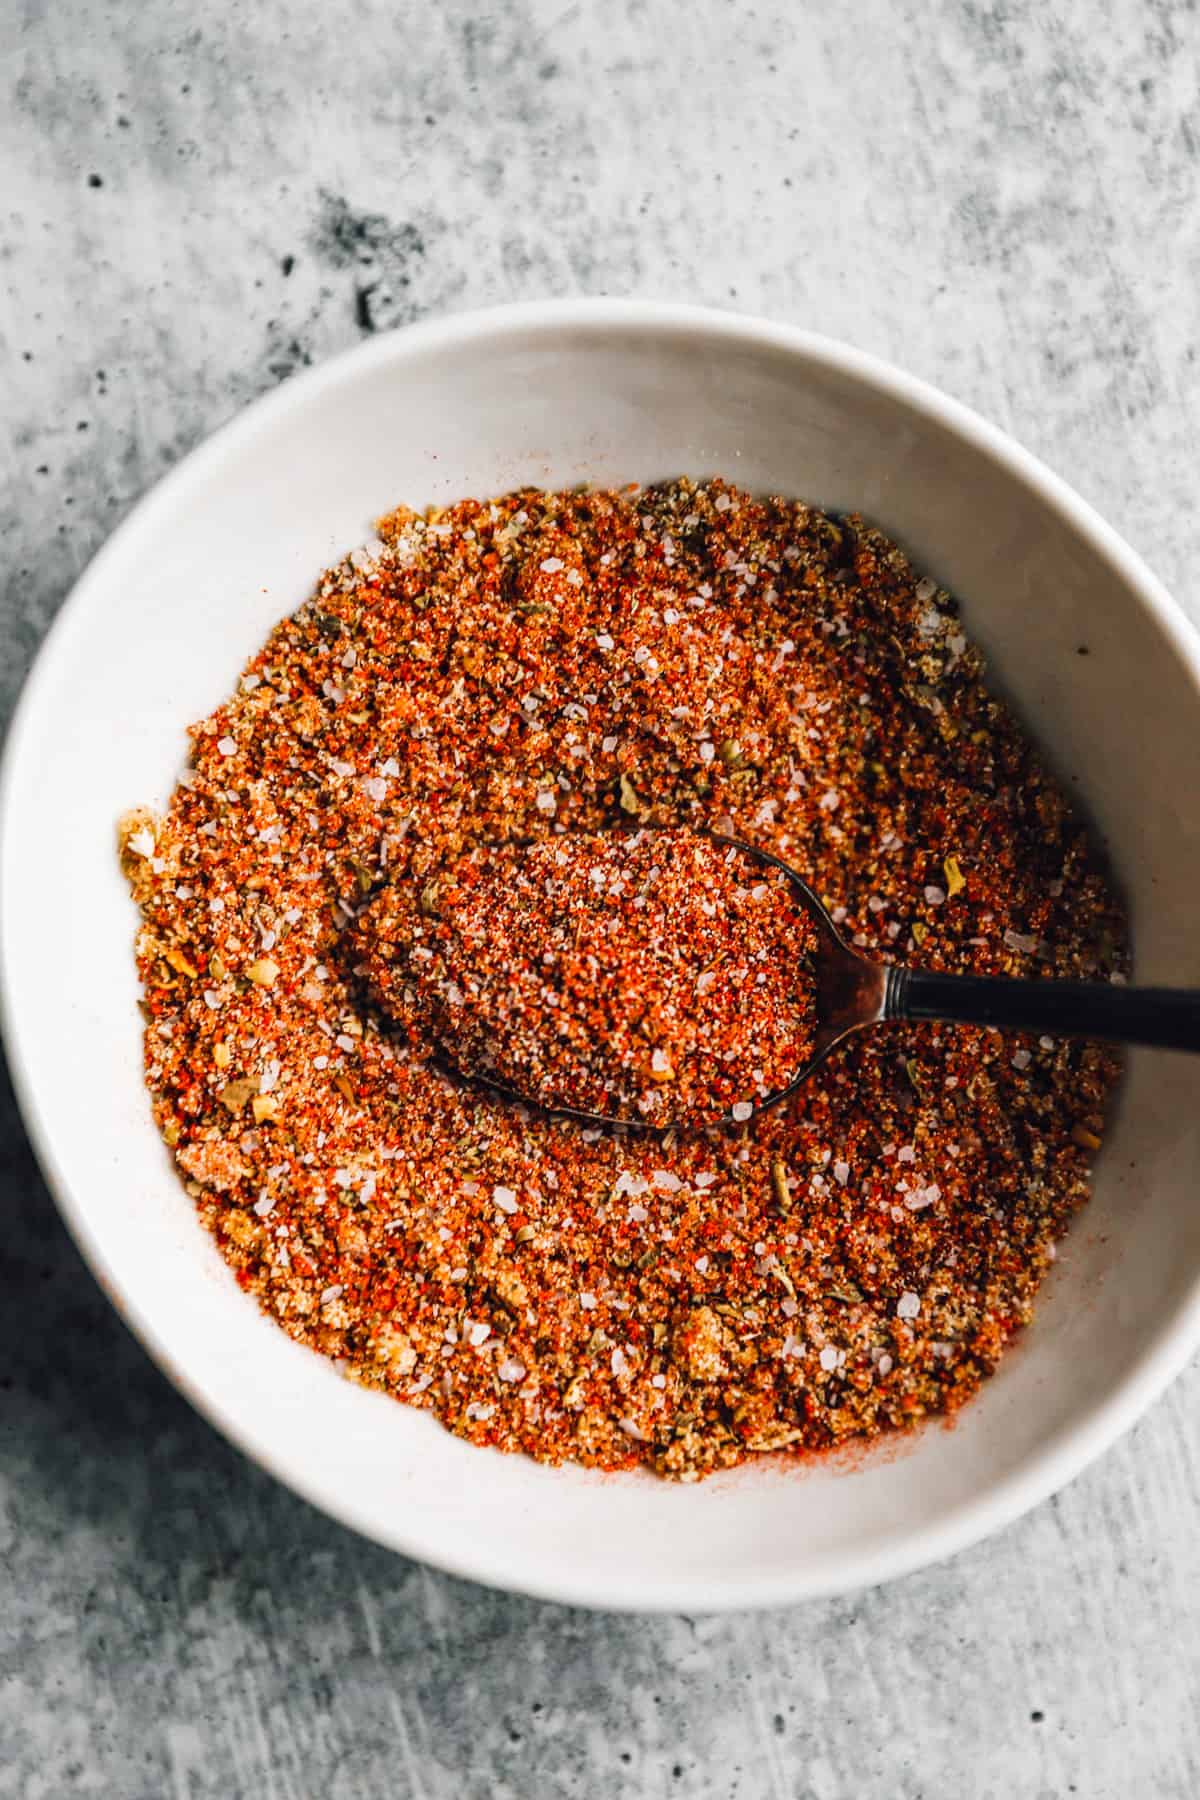 Homemade Spice Blends Seasoning - Recipes From A Pantry